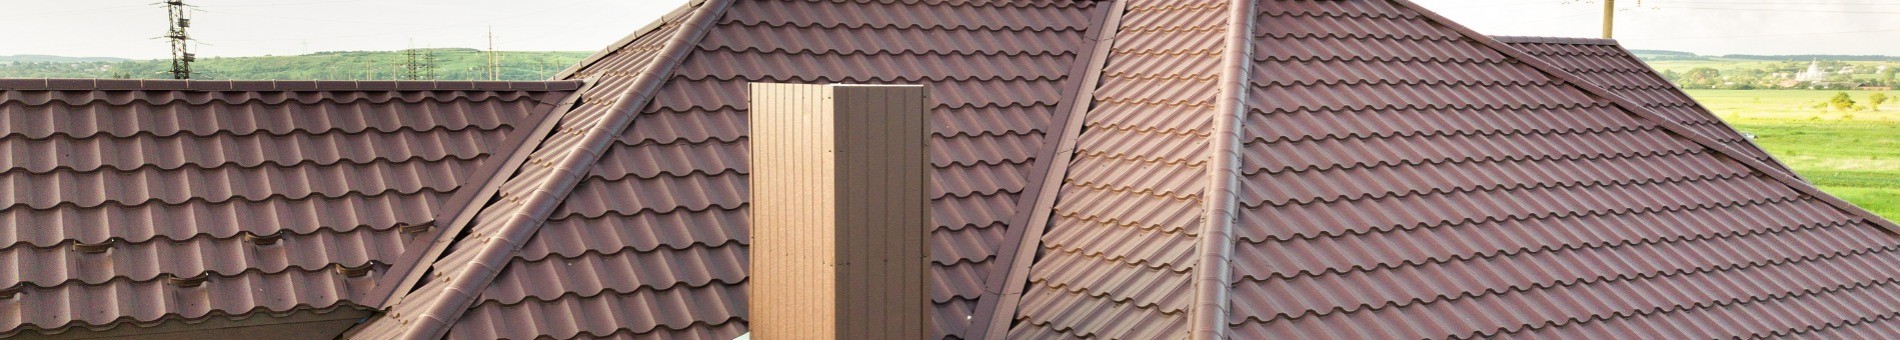 Pitched Roofing Materials